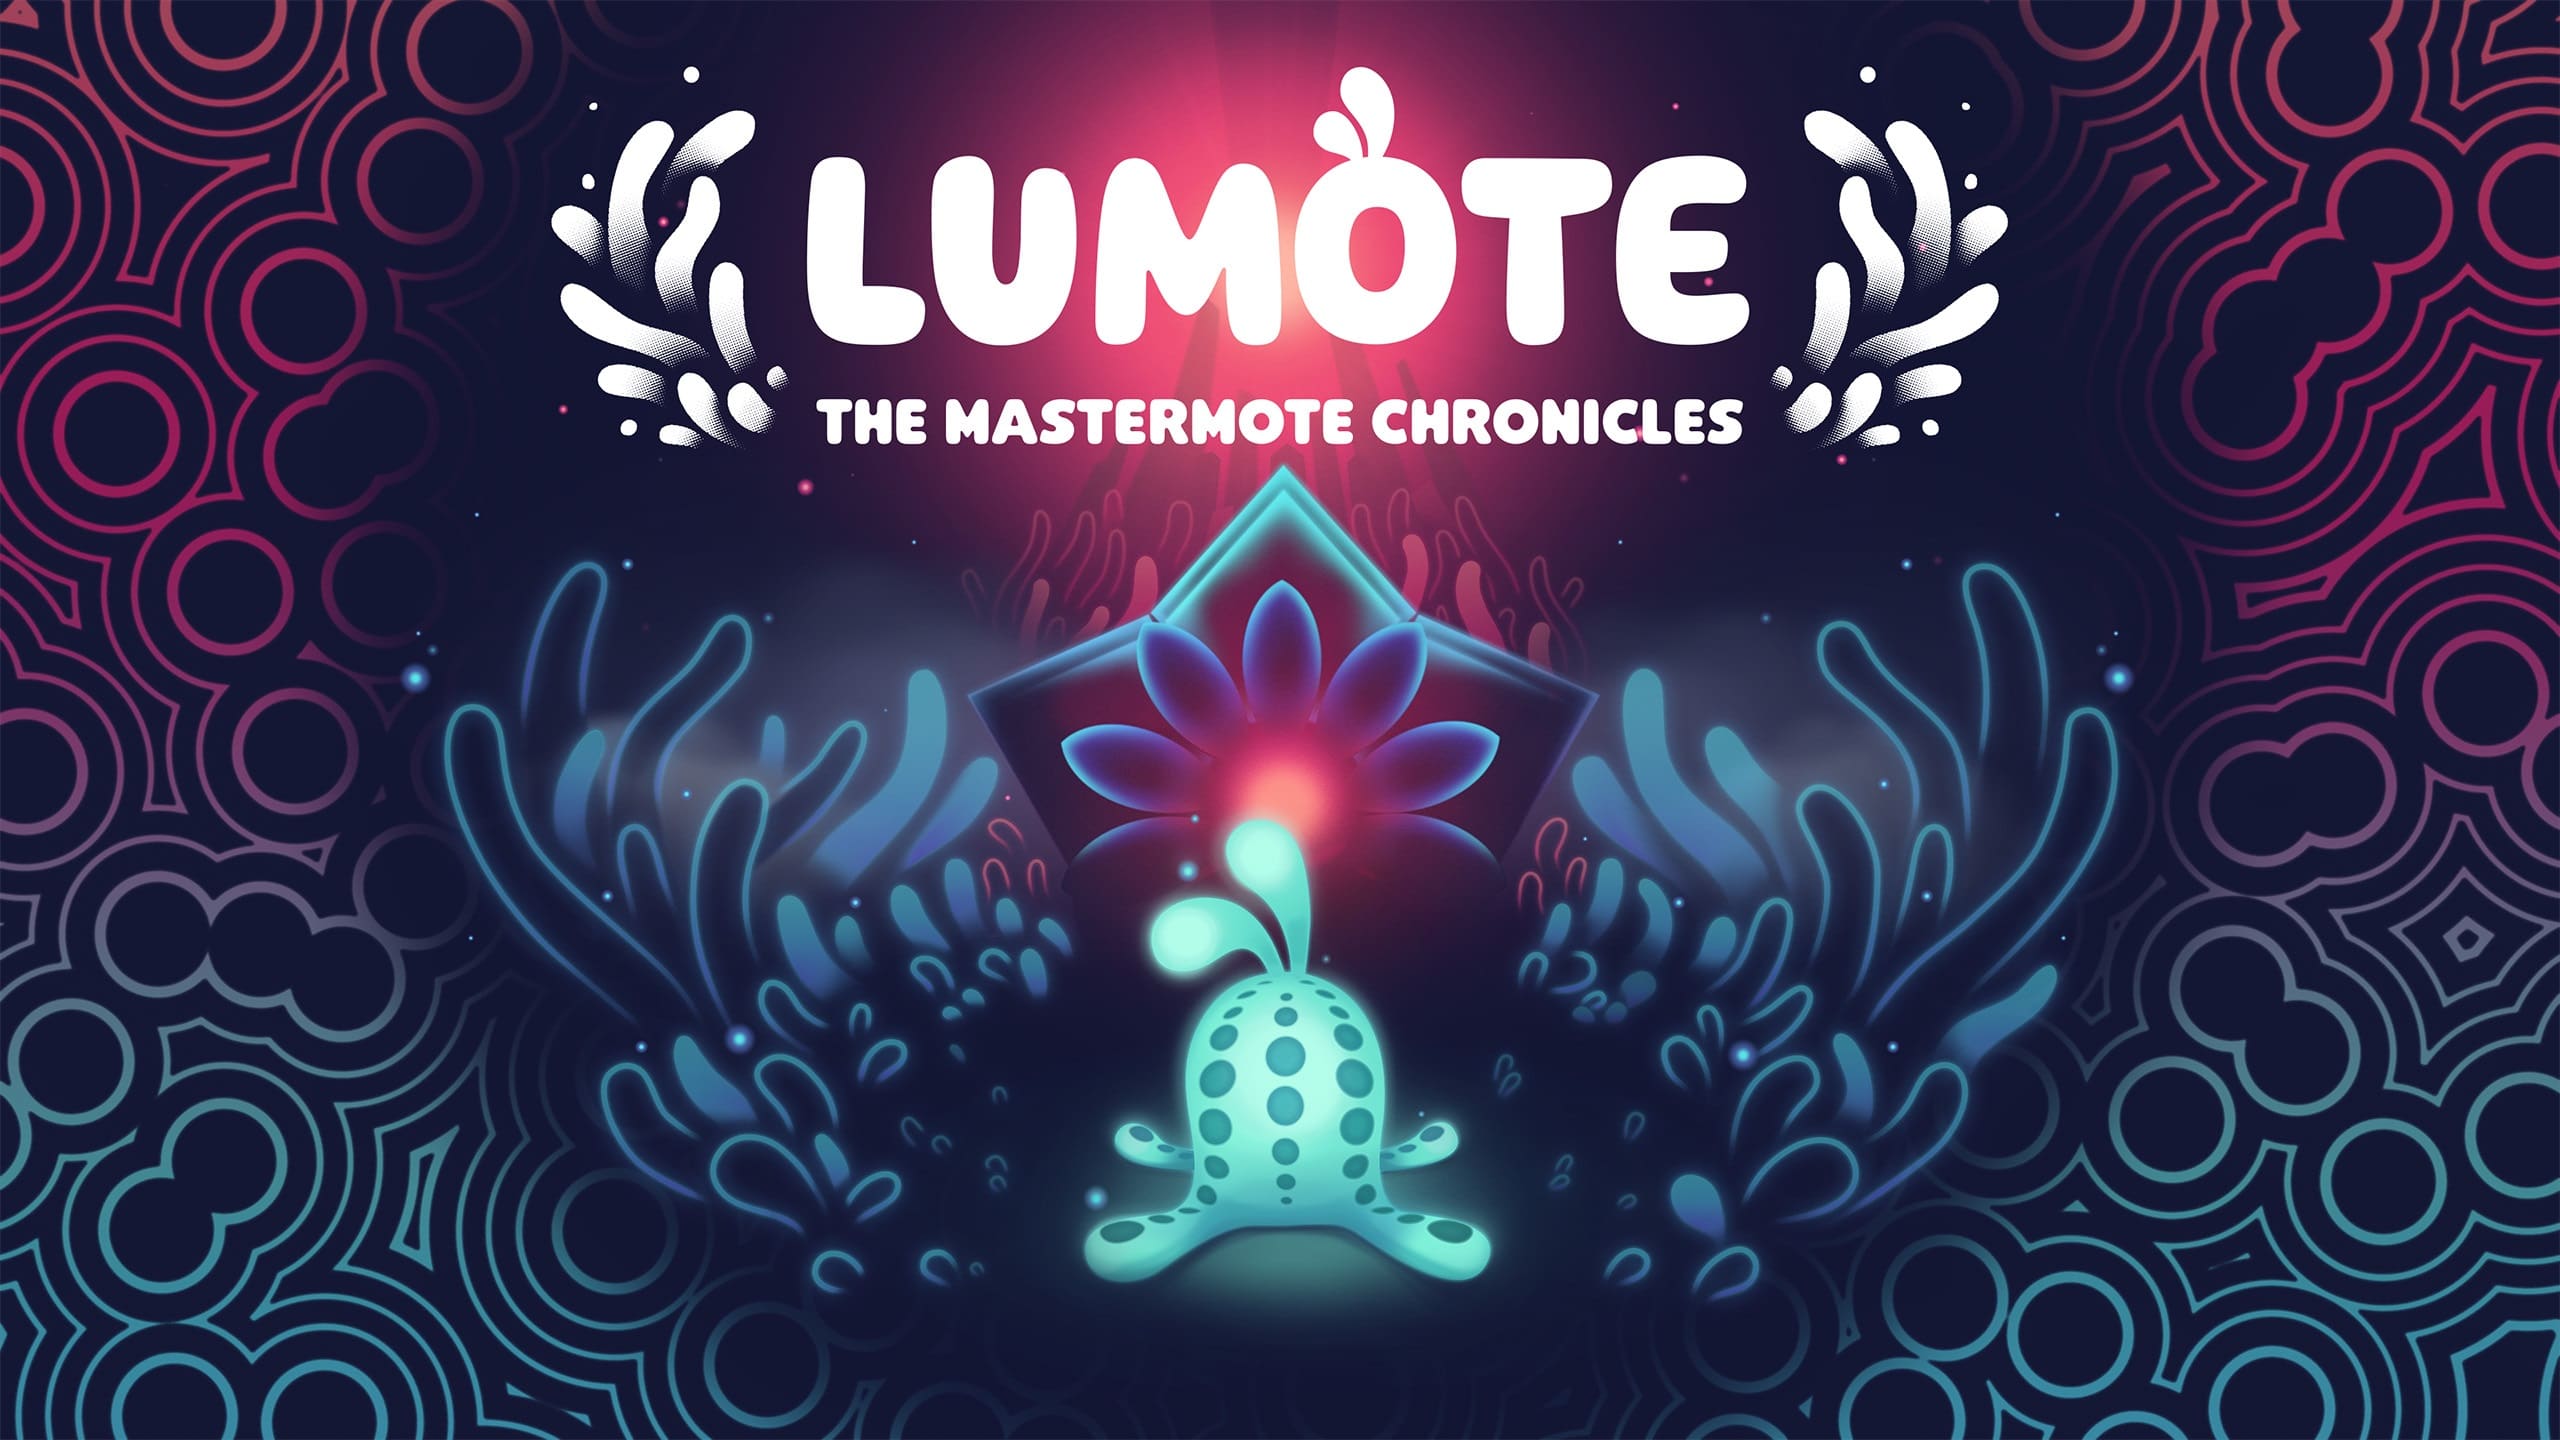 Lumote: The Mastermote Chronicles: release scheduled for early 2022 thumbnail